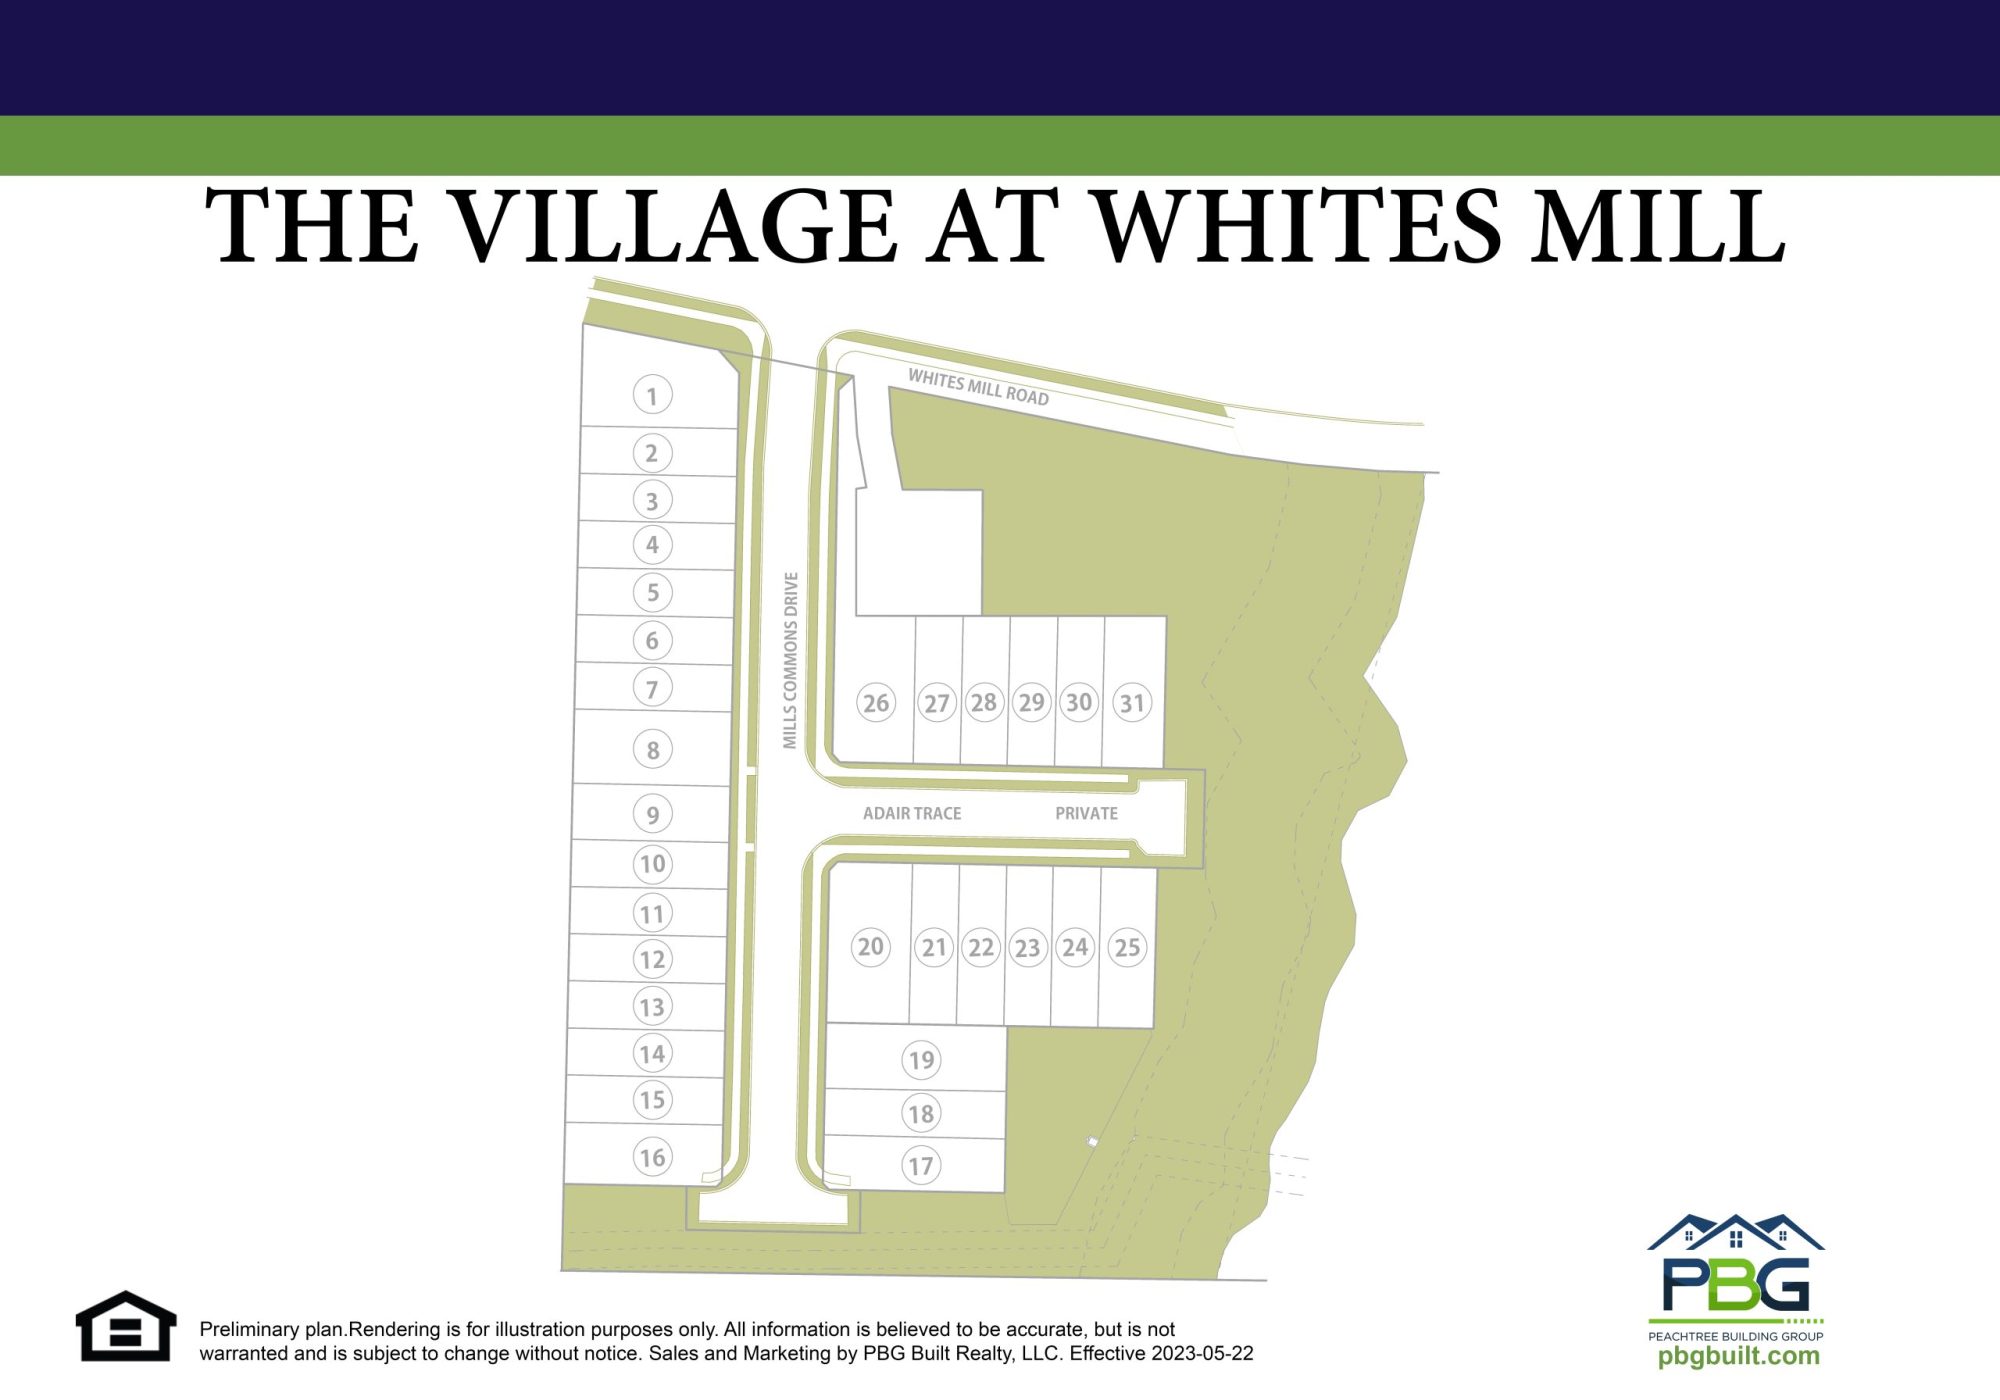 The Village at Whites Mill